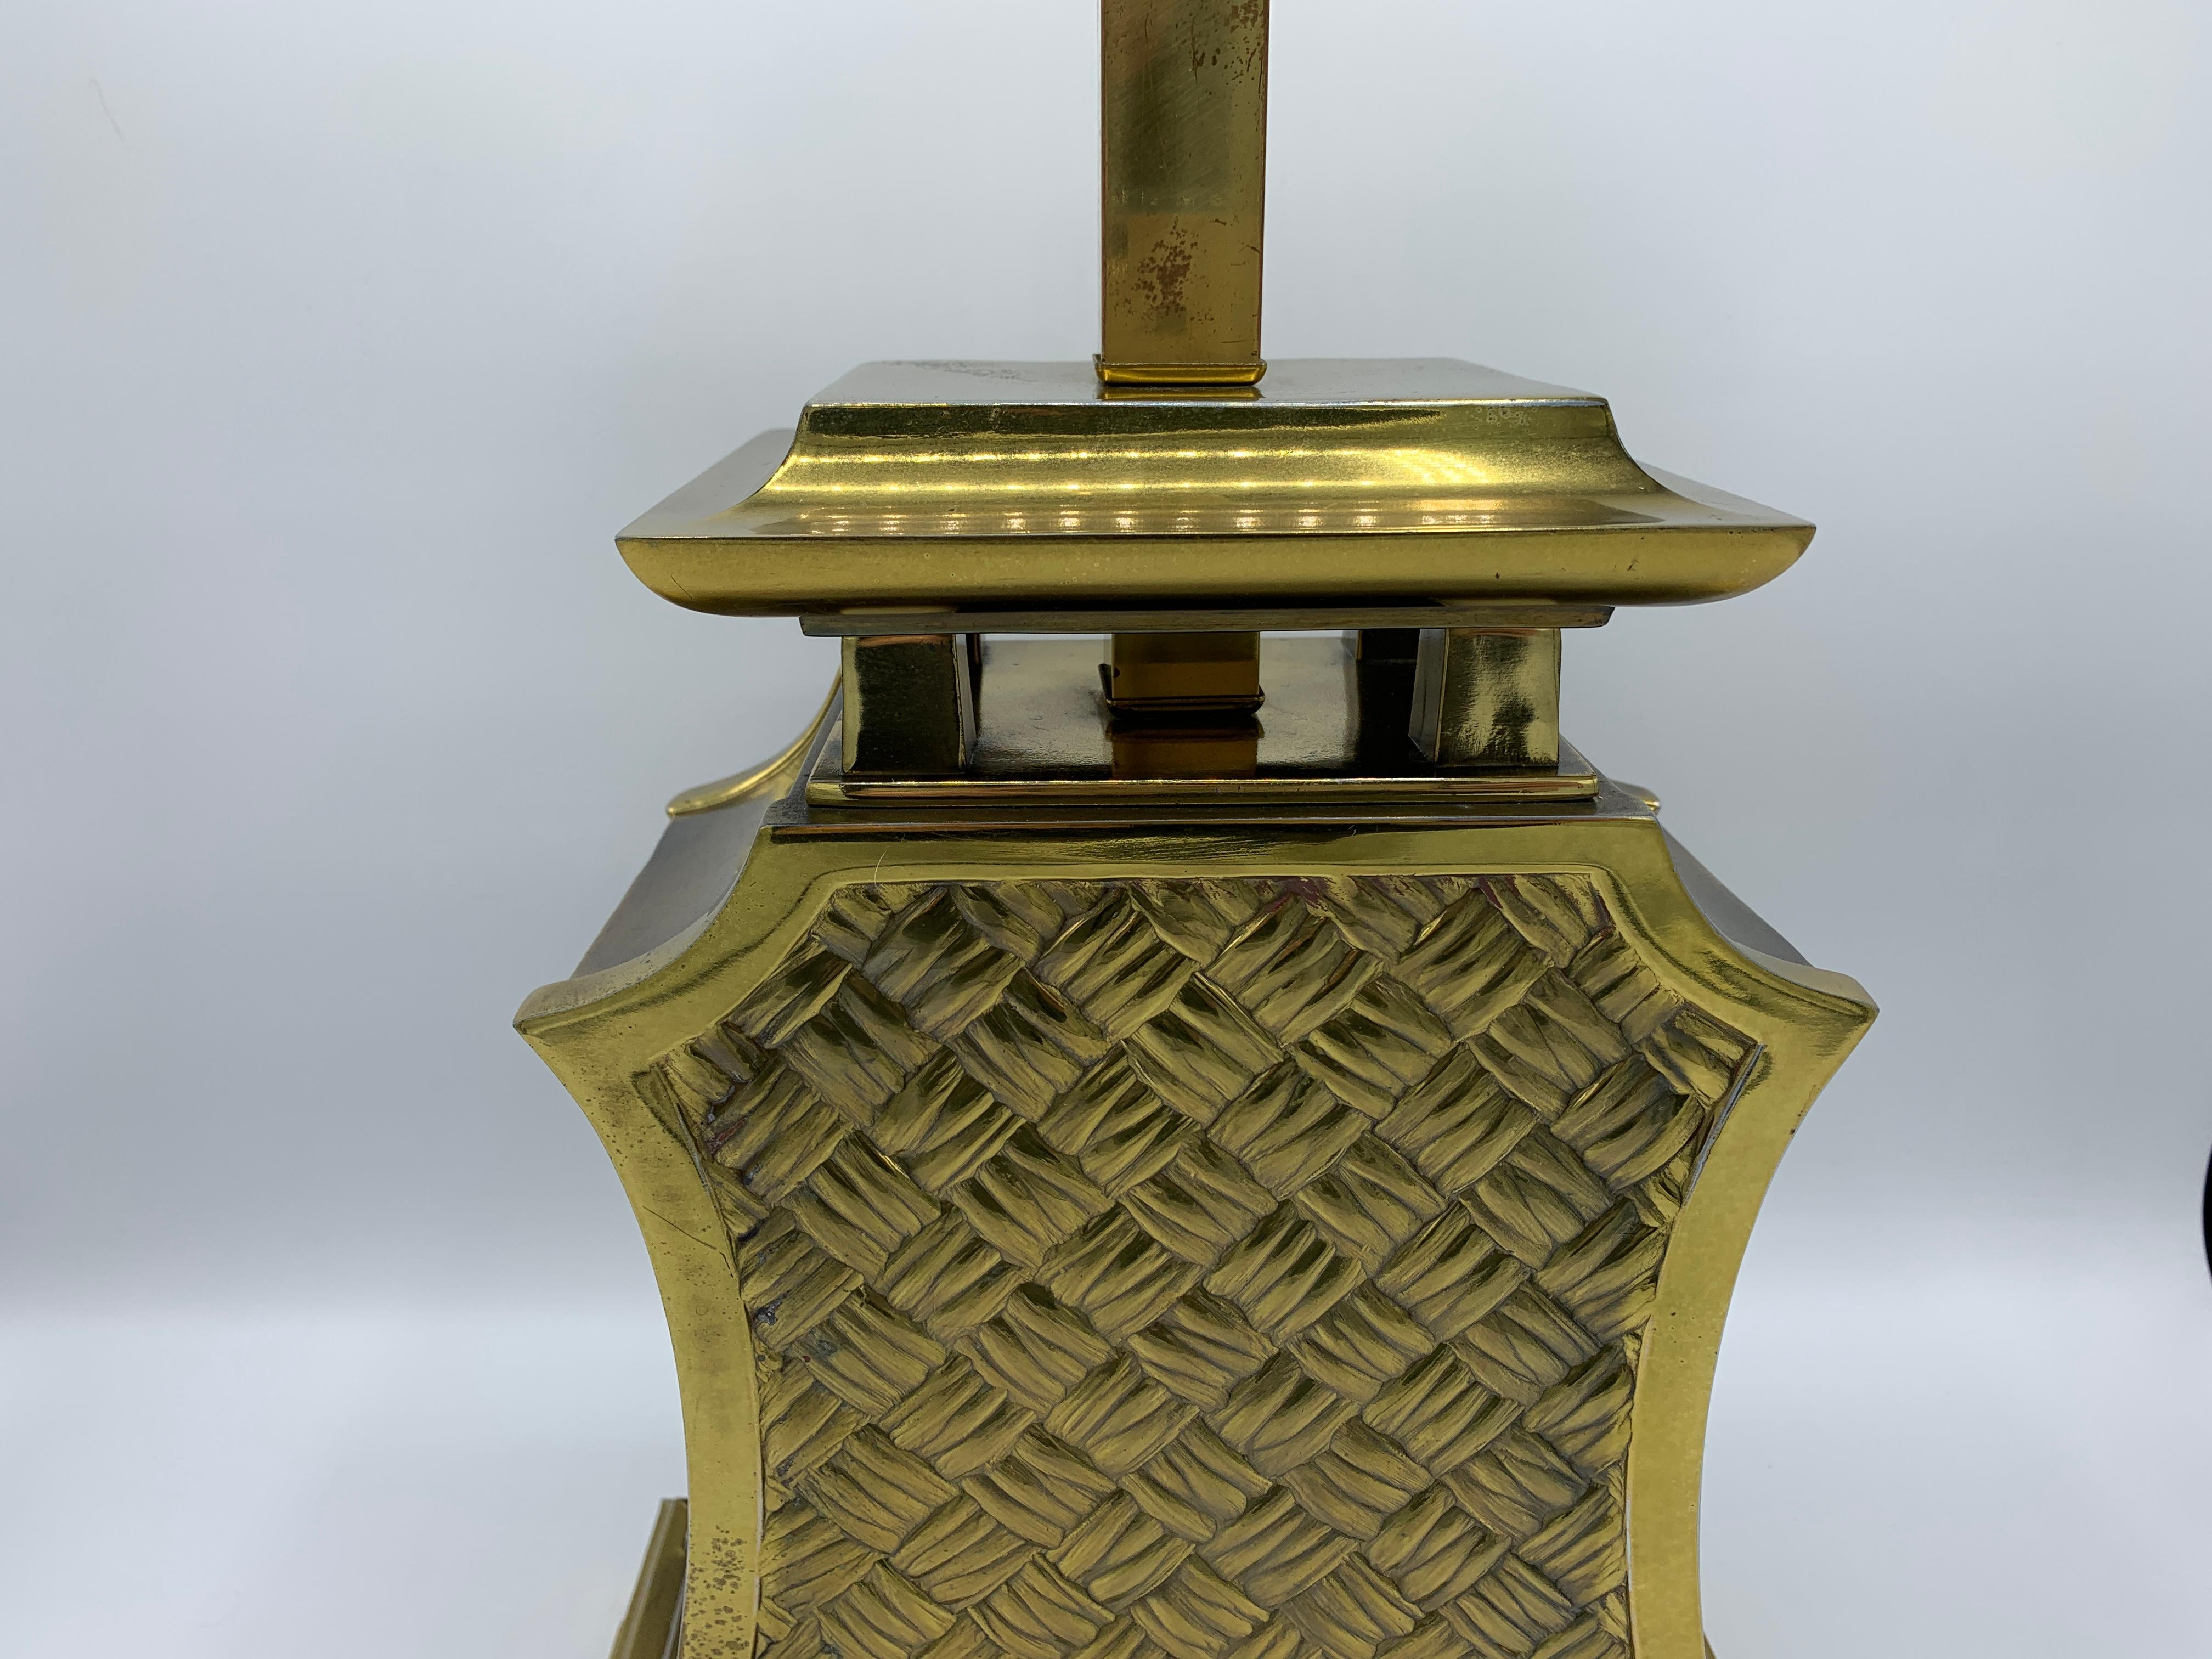 Chinoiserie 1980s Brass Pagoda and Basketweave Motif Lamp For Sale